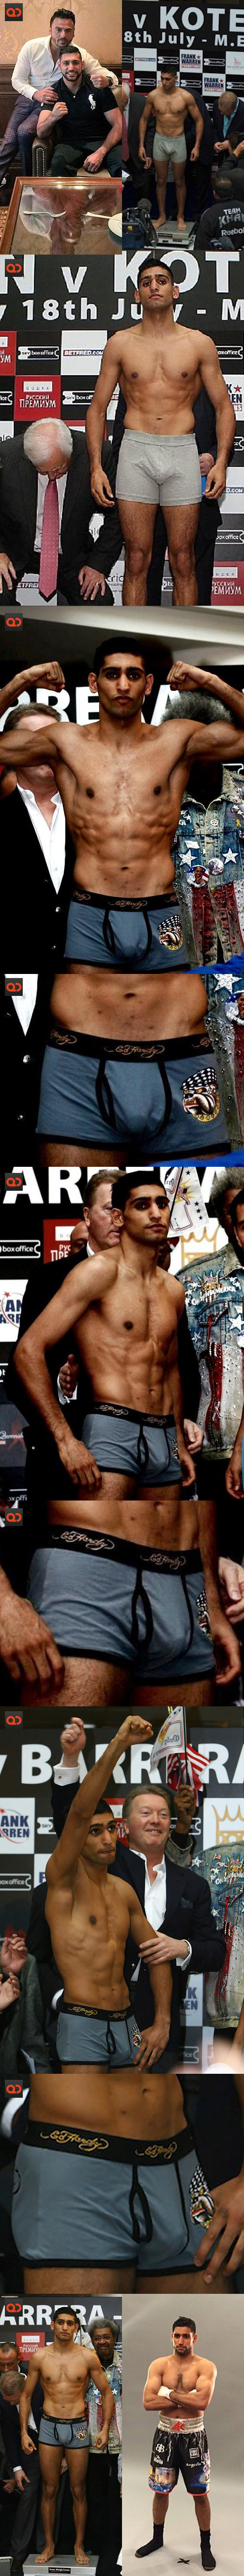 Amir Khan, British-Pakistani Boxer, Gets Caught With His Pants Down Again!